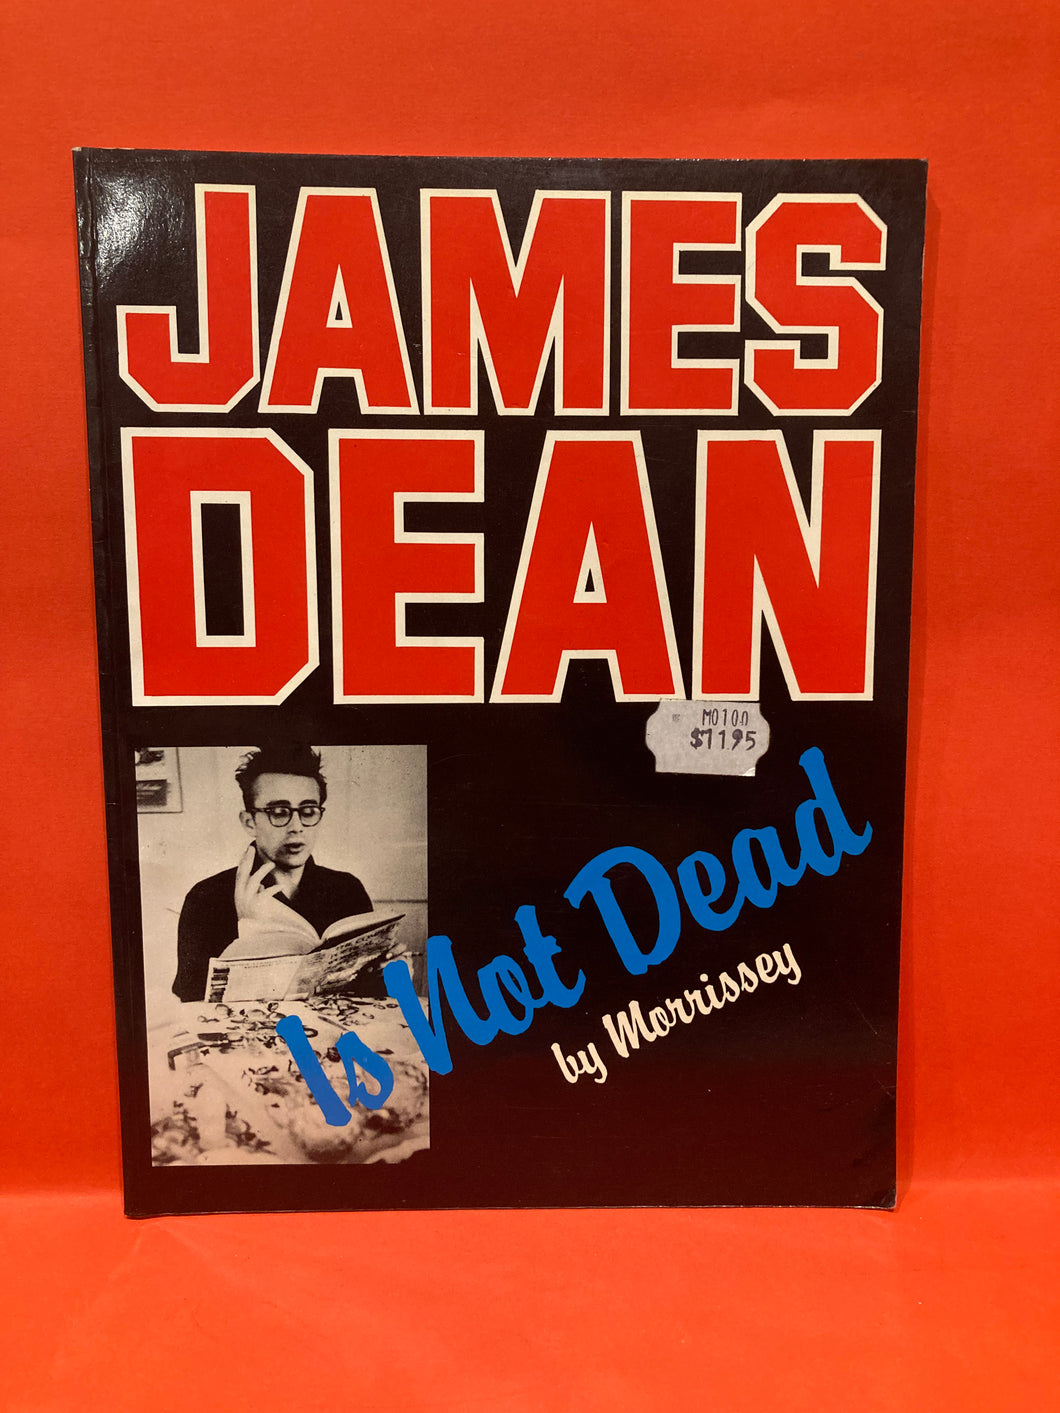 JAMES DEAN IS NOT DEAD - By Morrissey - Paperback Book -  ULTRA RARE 1st ed. 1983